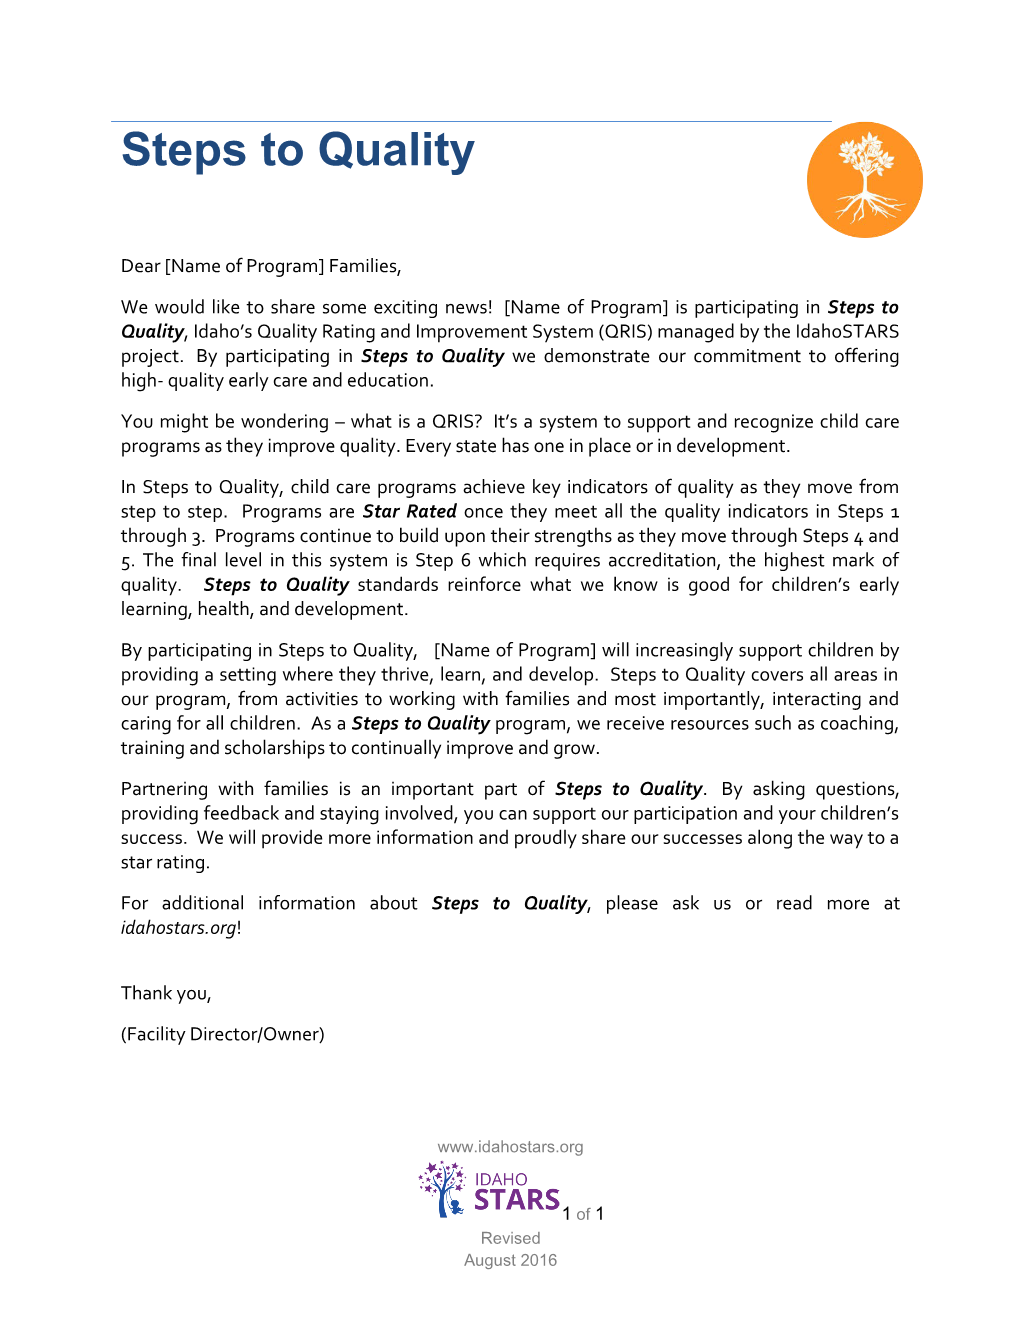 Steps to Quality - Parent Letter